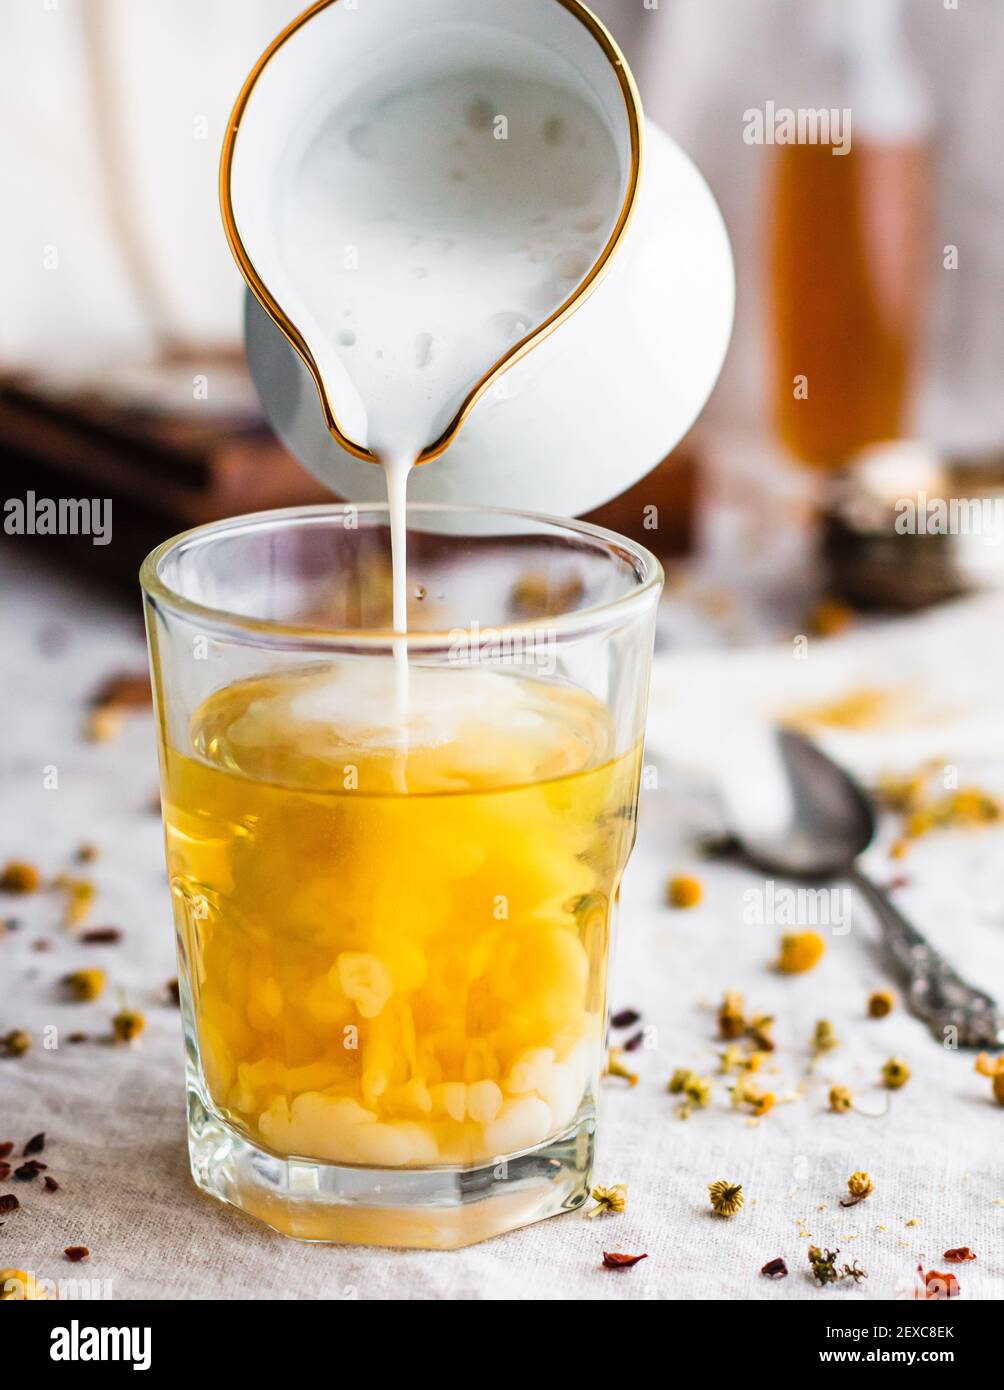 Foamy milk pouring into a glass filled with yellow chamomile tea Stock Photo